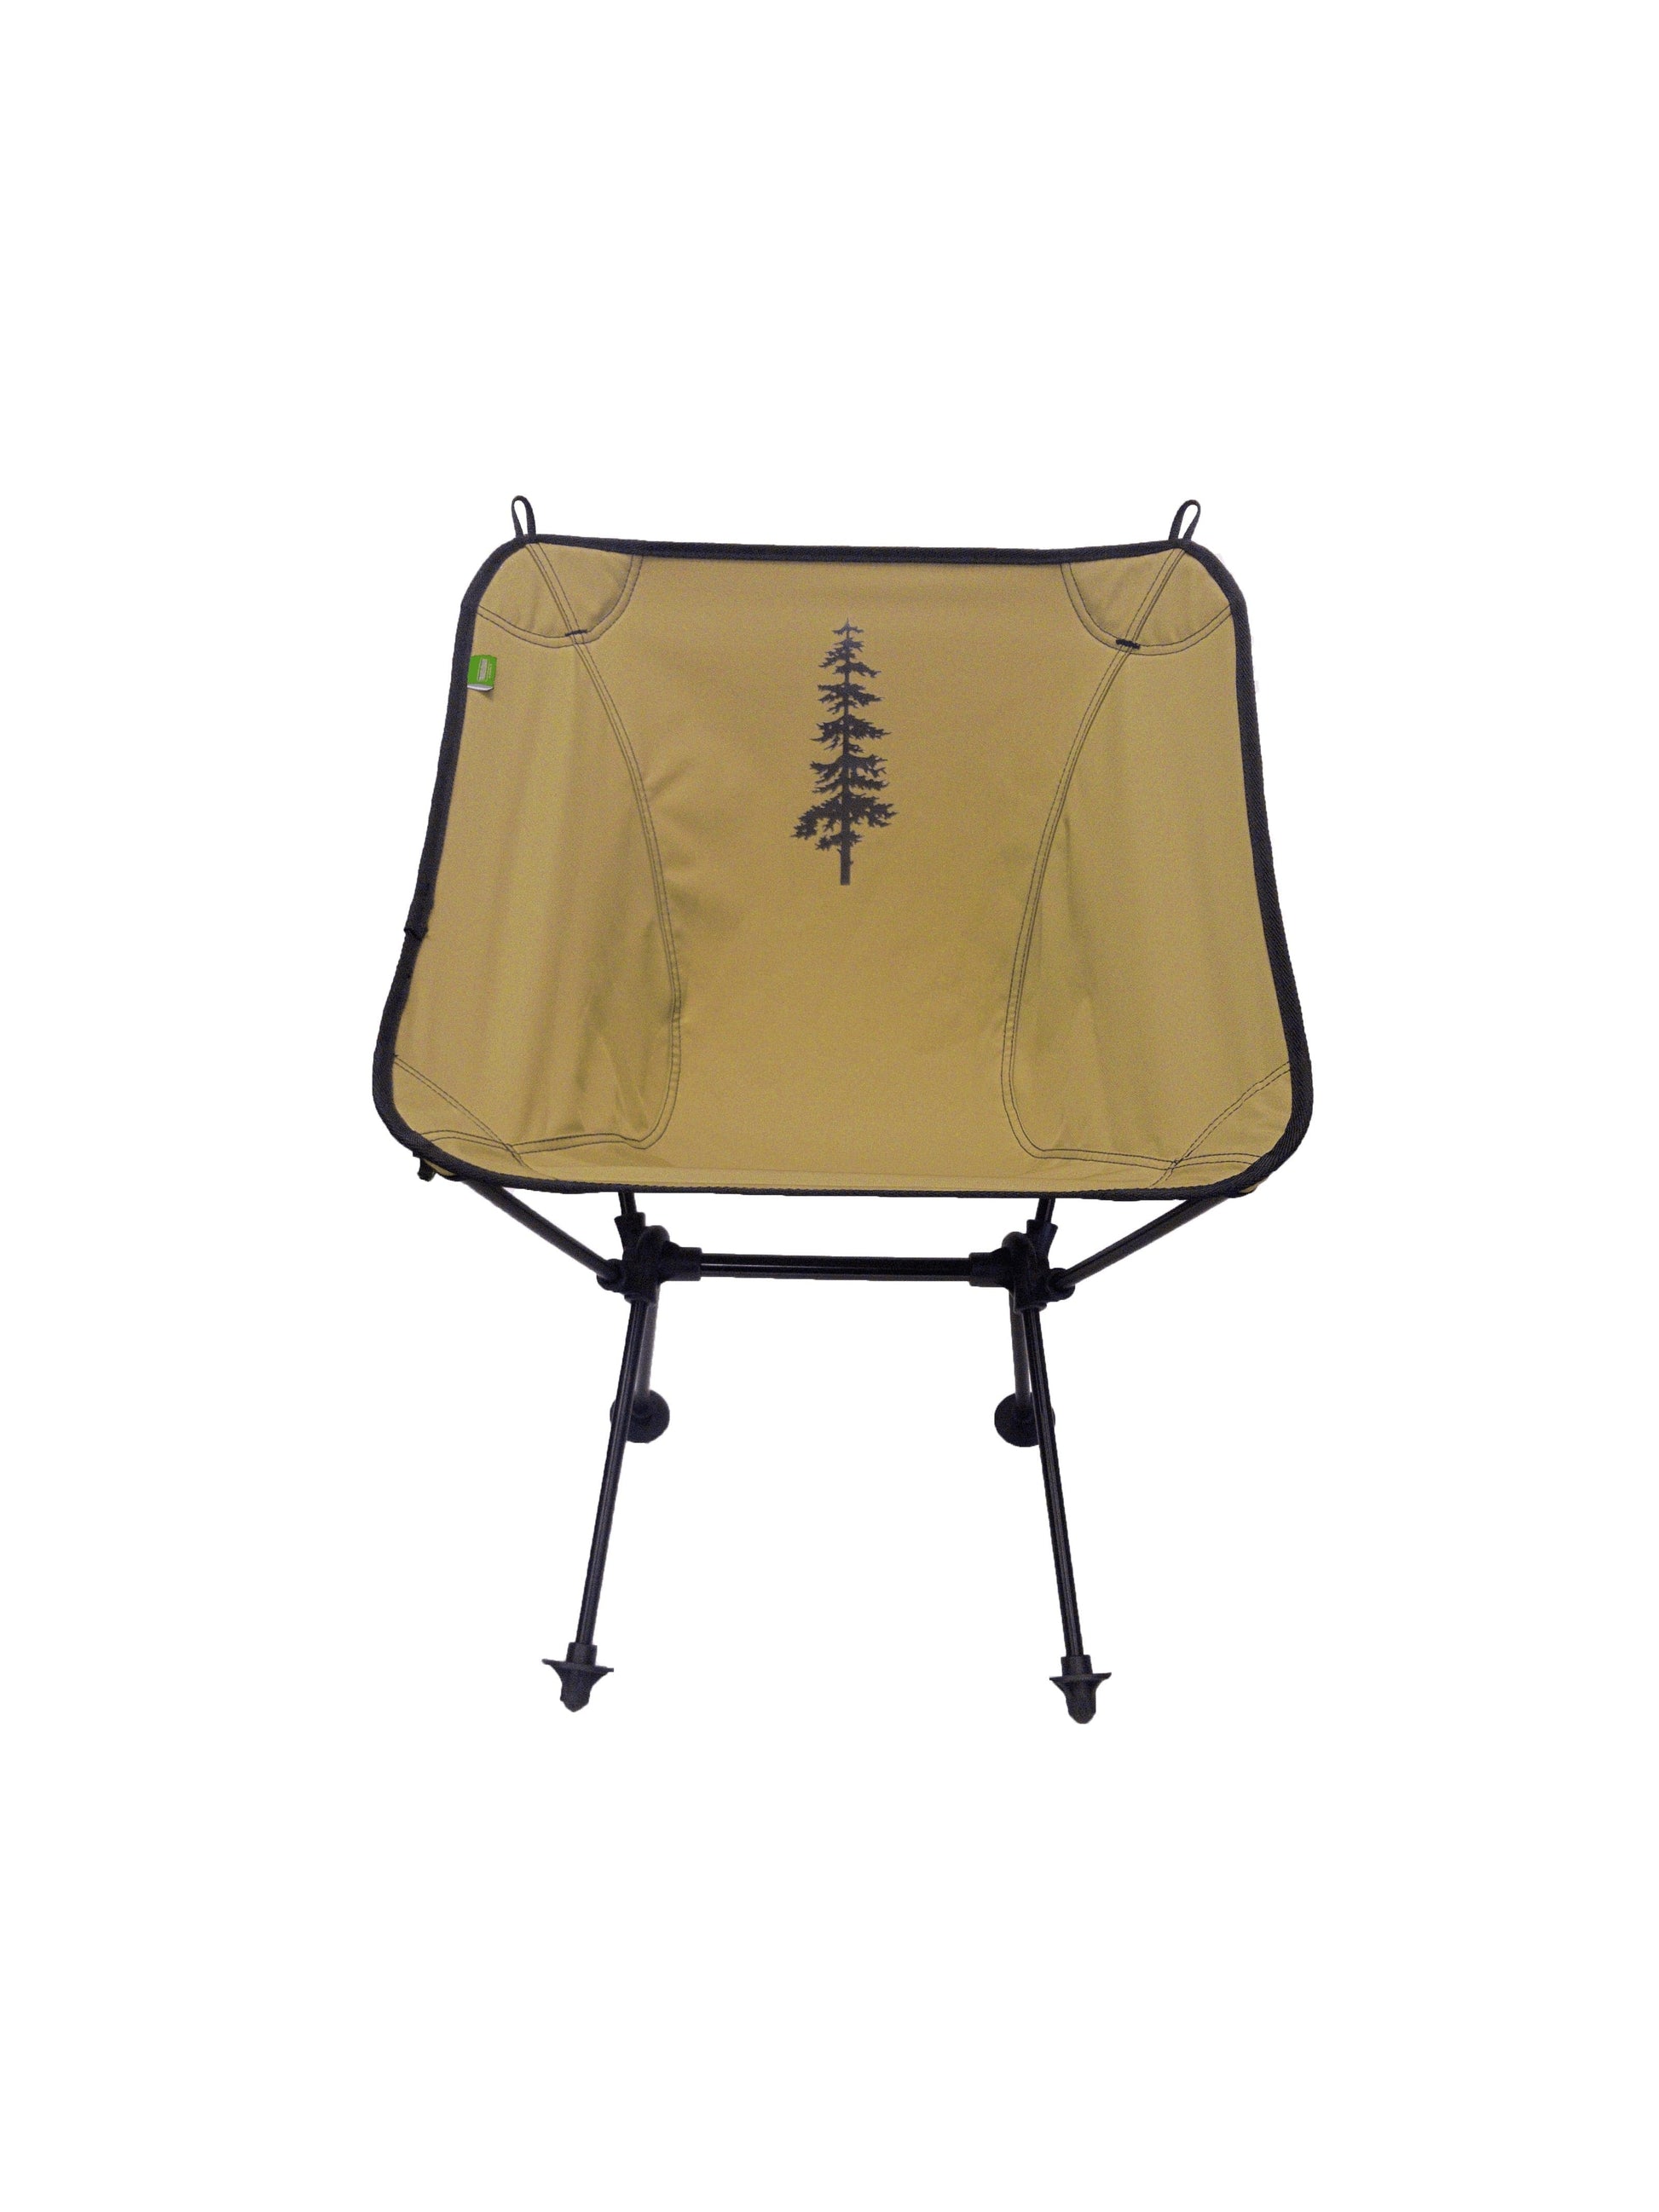 Featuring the C-Series Joey Chair with Repreve™ Recycled Fabric camp chair manufactured by Travel Chair shown here from one angle.